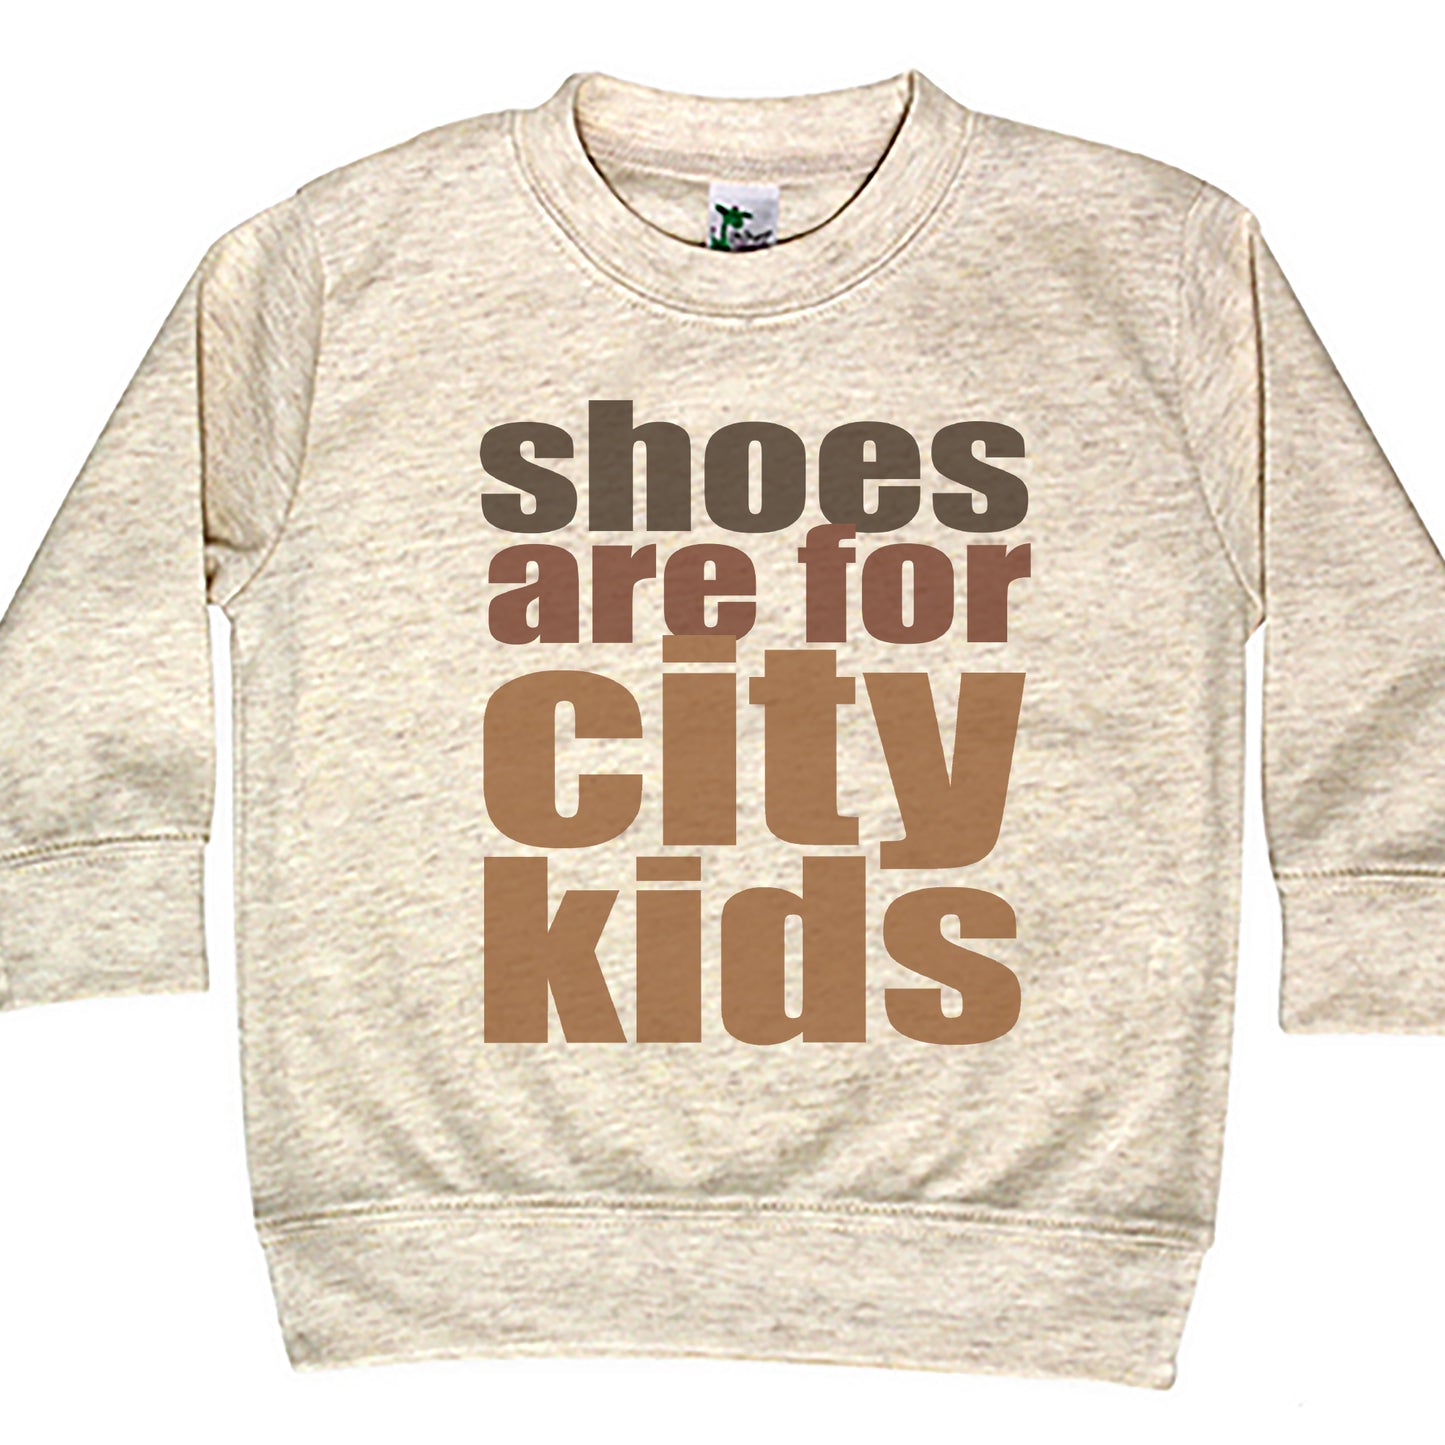 "Shoes are for city kids" Unisex Barefoot Long Sleeve shirt